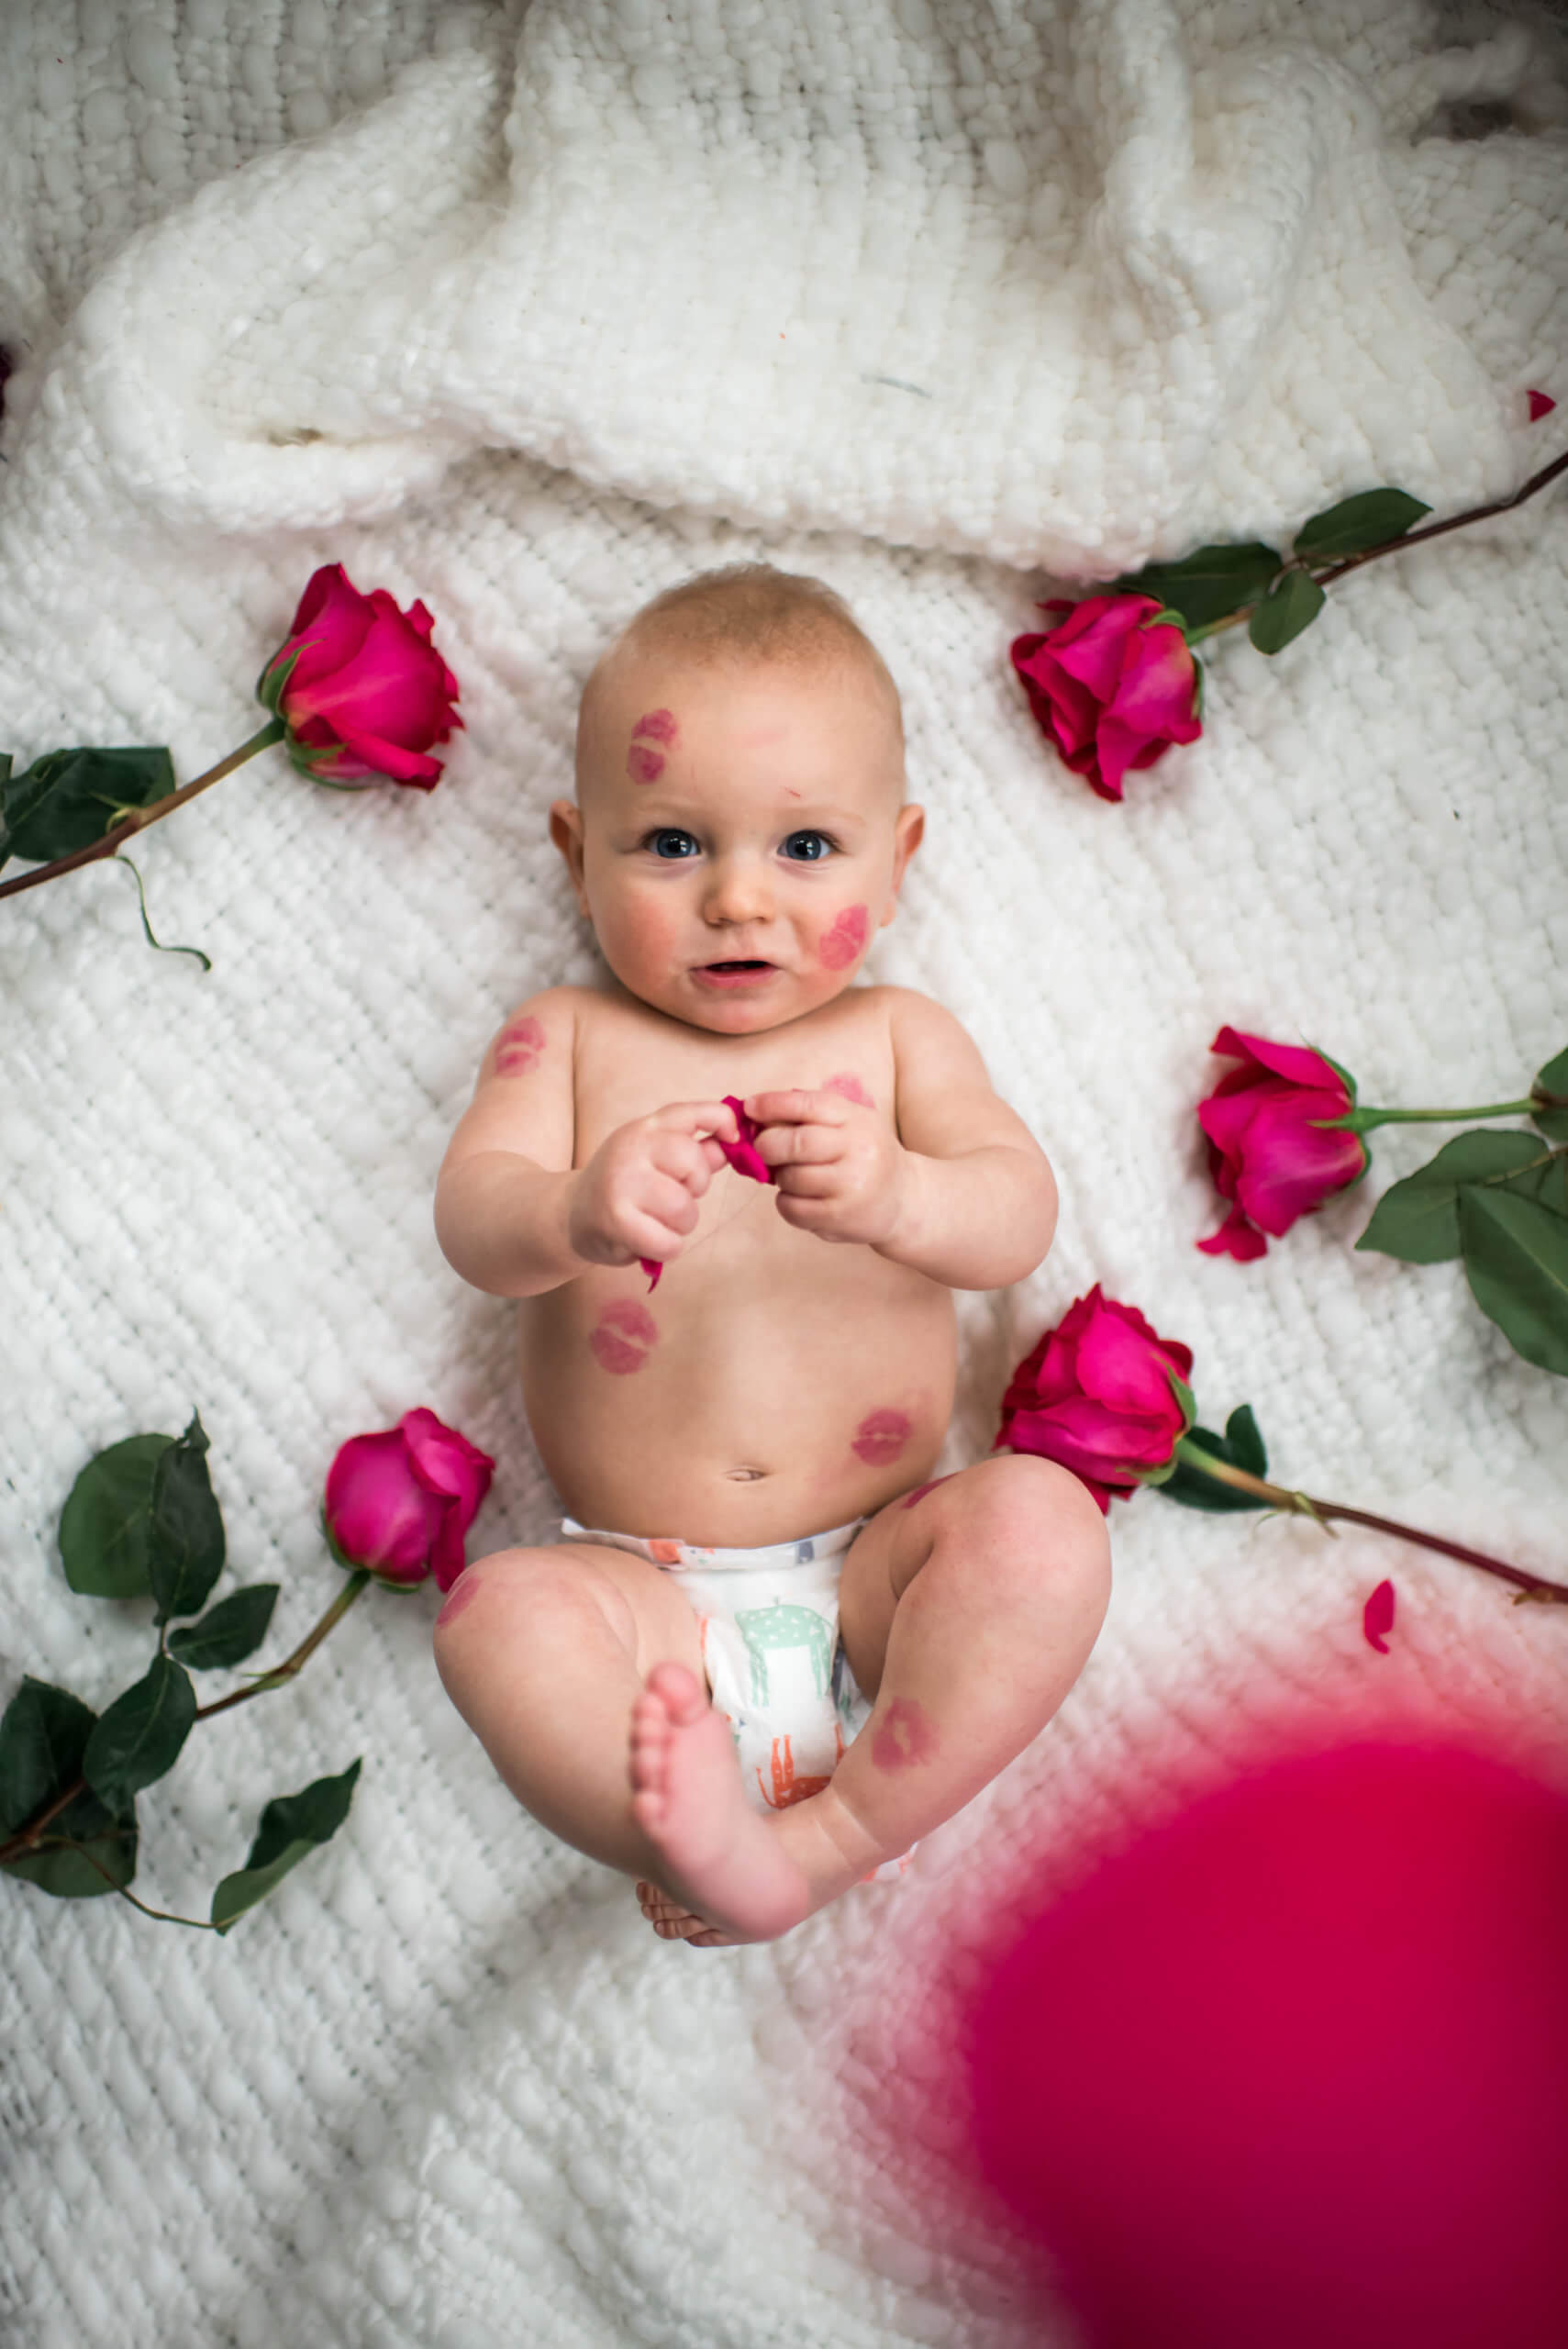 Baby Photoshoot Ideas Monthly - Unique Ideas For Baby